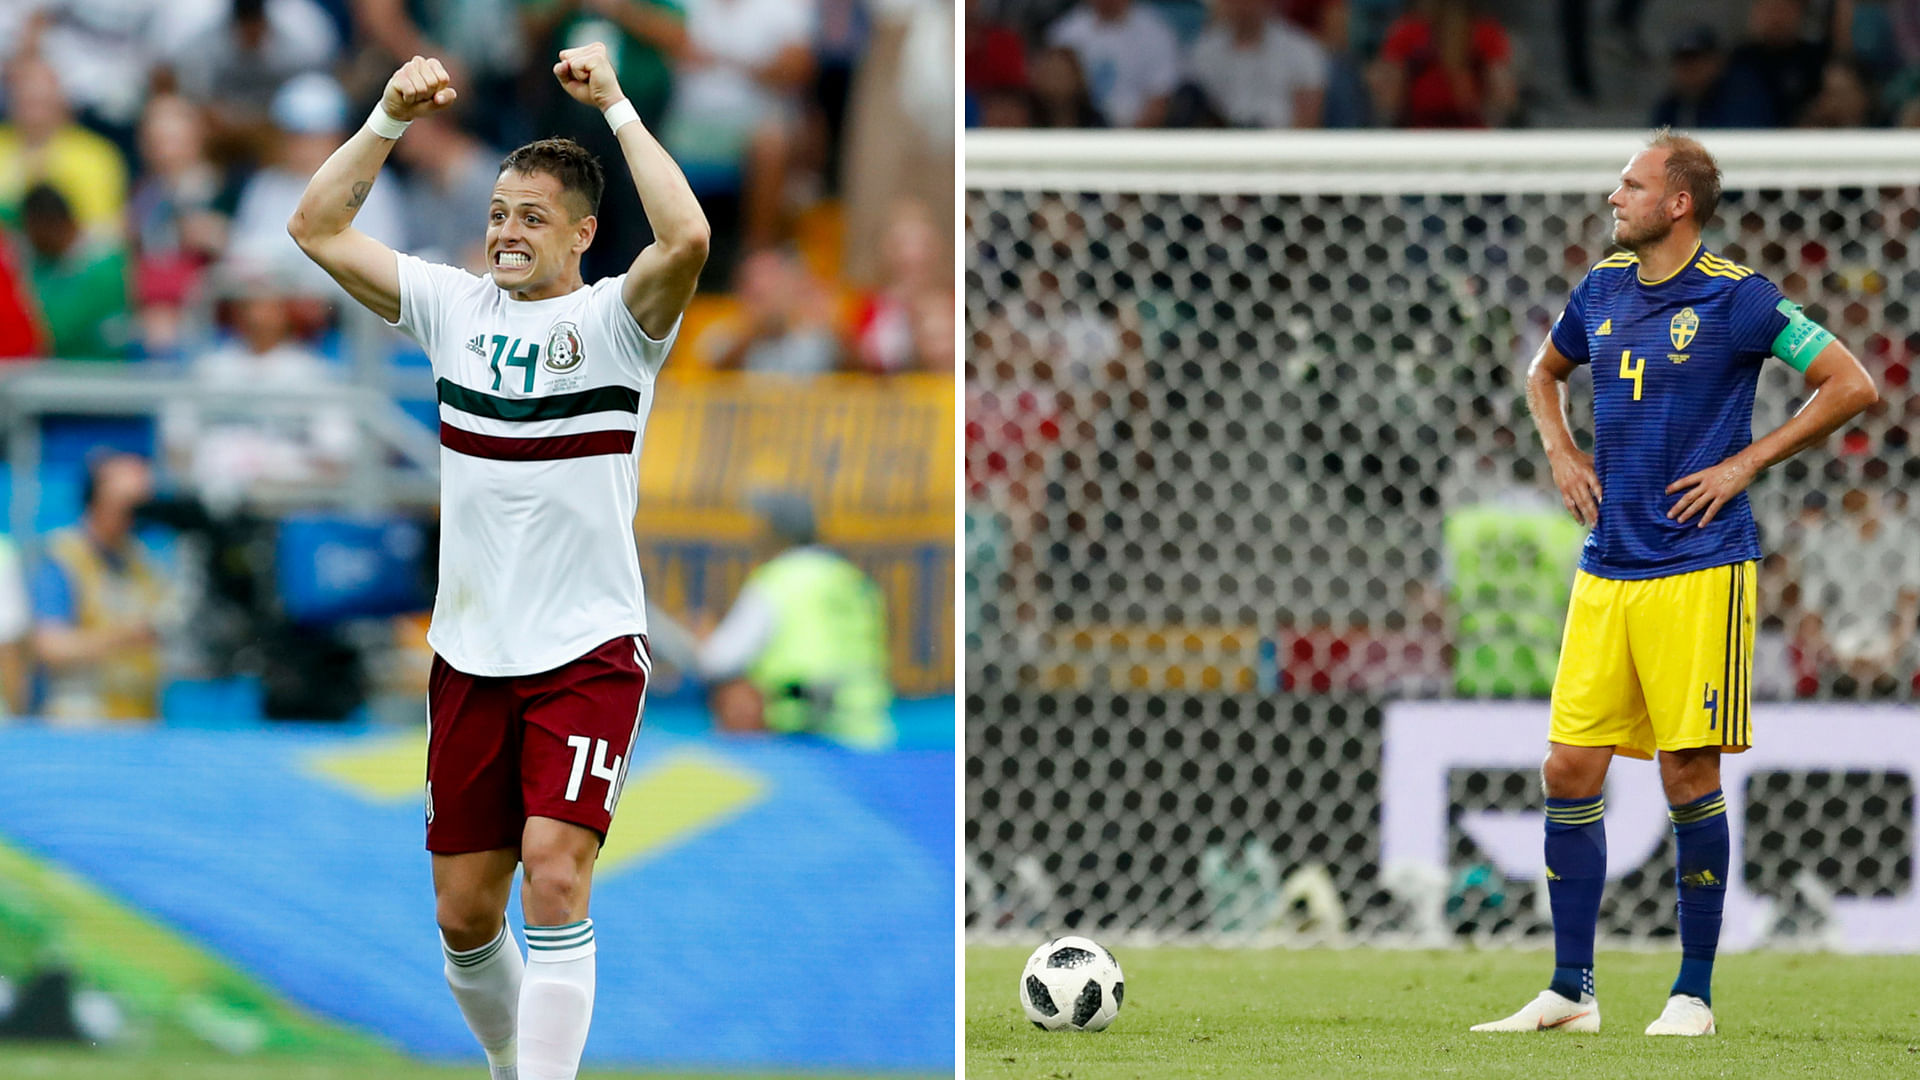 Javier Hernandez (left) and Andreas Granqvist have both scored one goal each, yet their mentalities are different as Sweden comes off a last minute loss to Germany